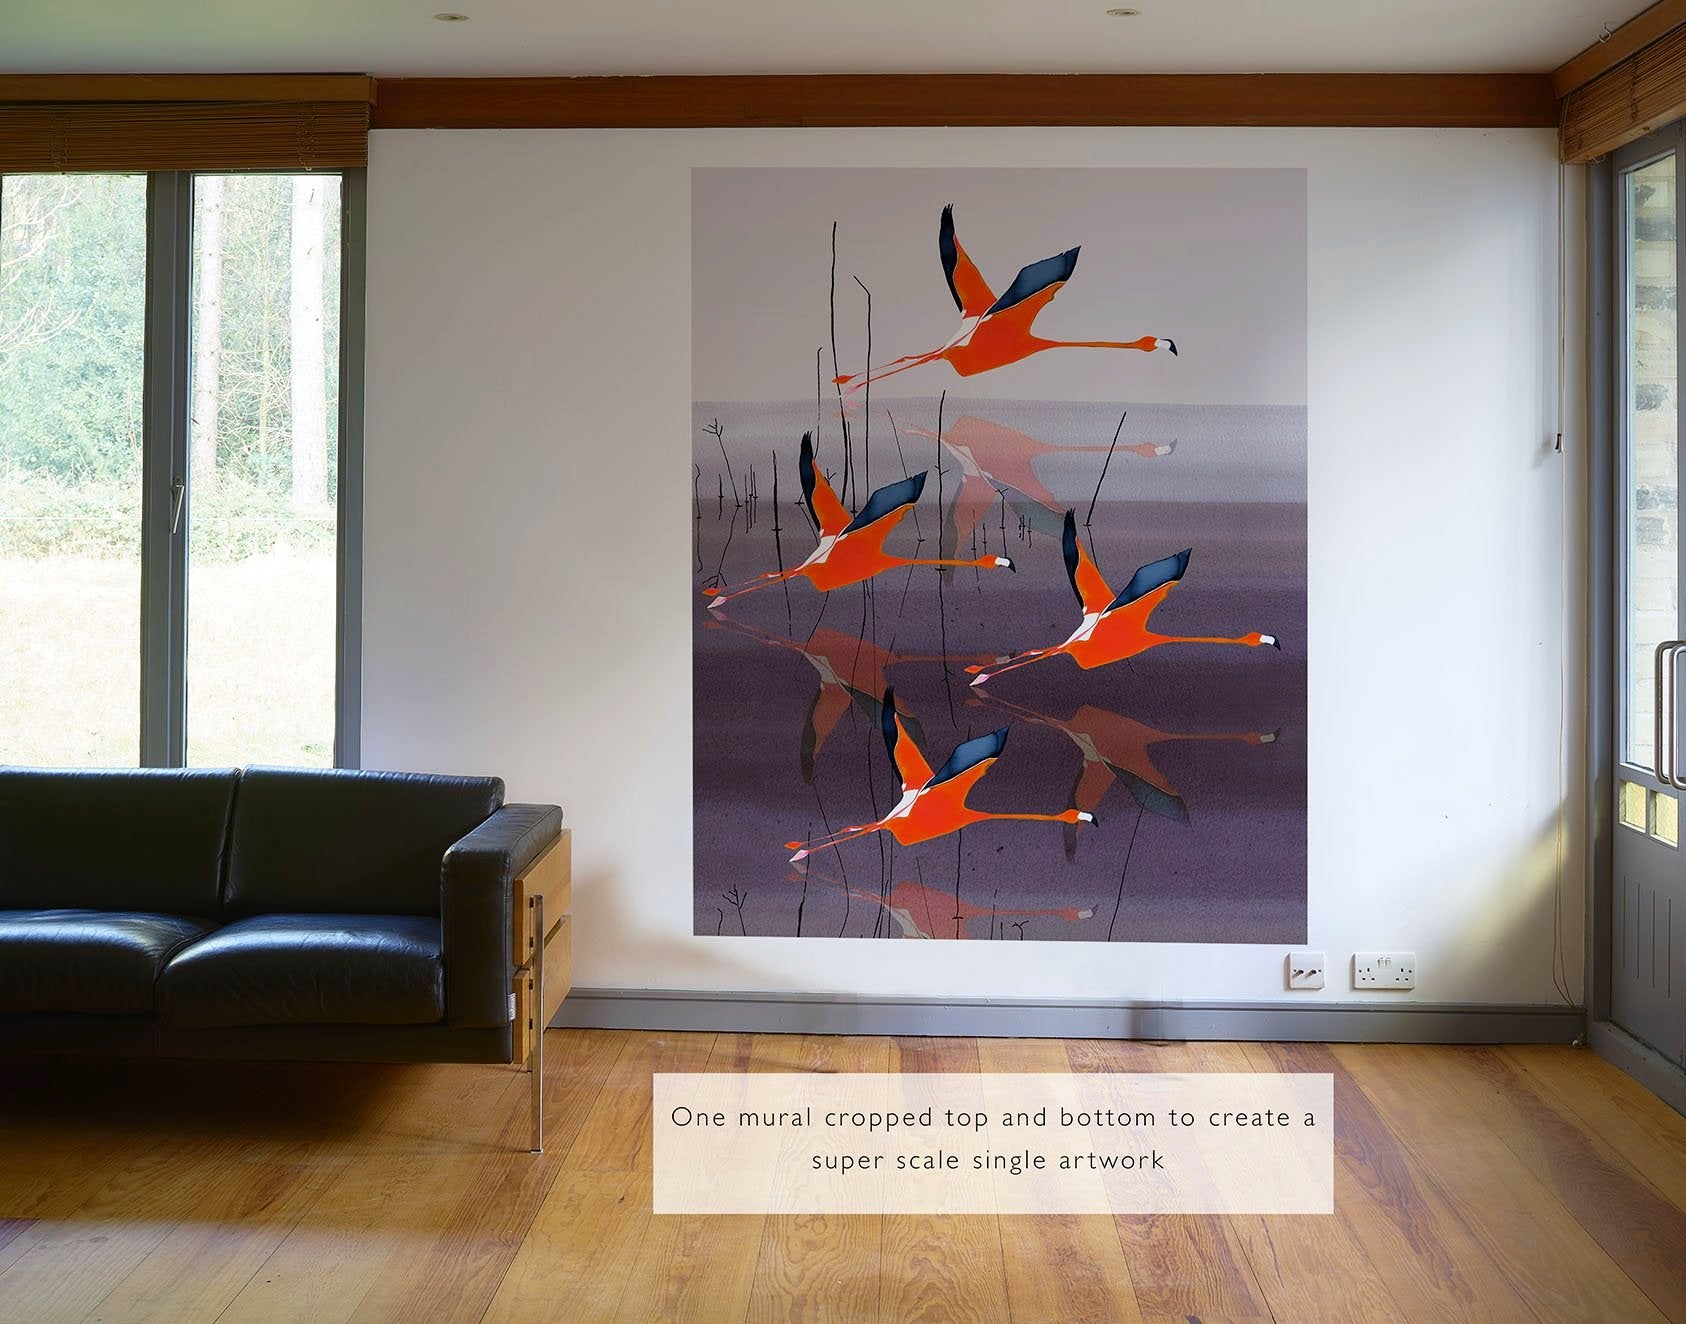 Breaking dawn in Orange mural by Anna Jacobs, hung as repeat wallpaper in a modern apartment